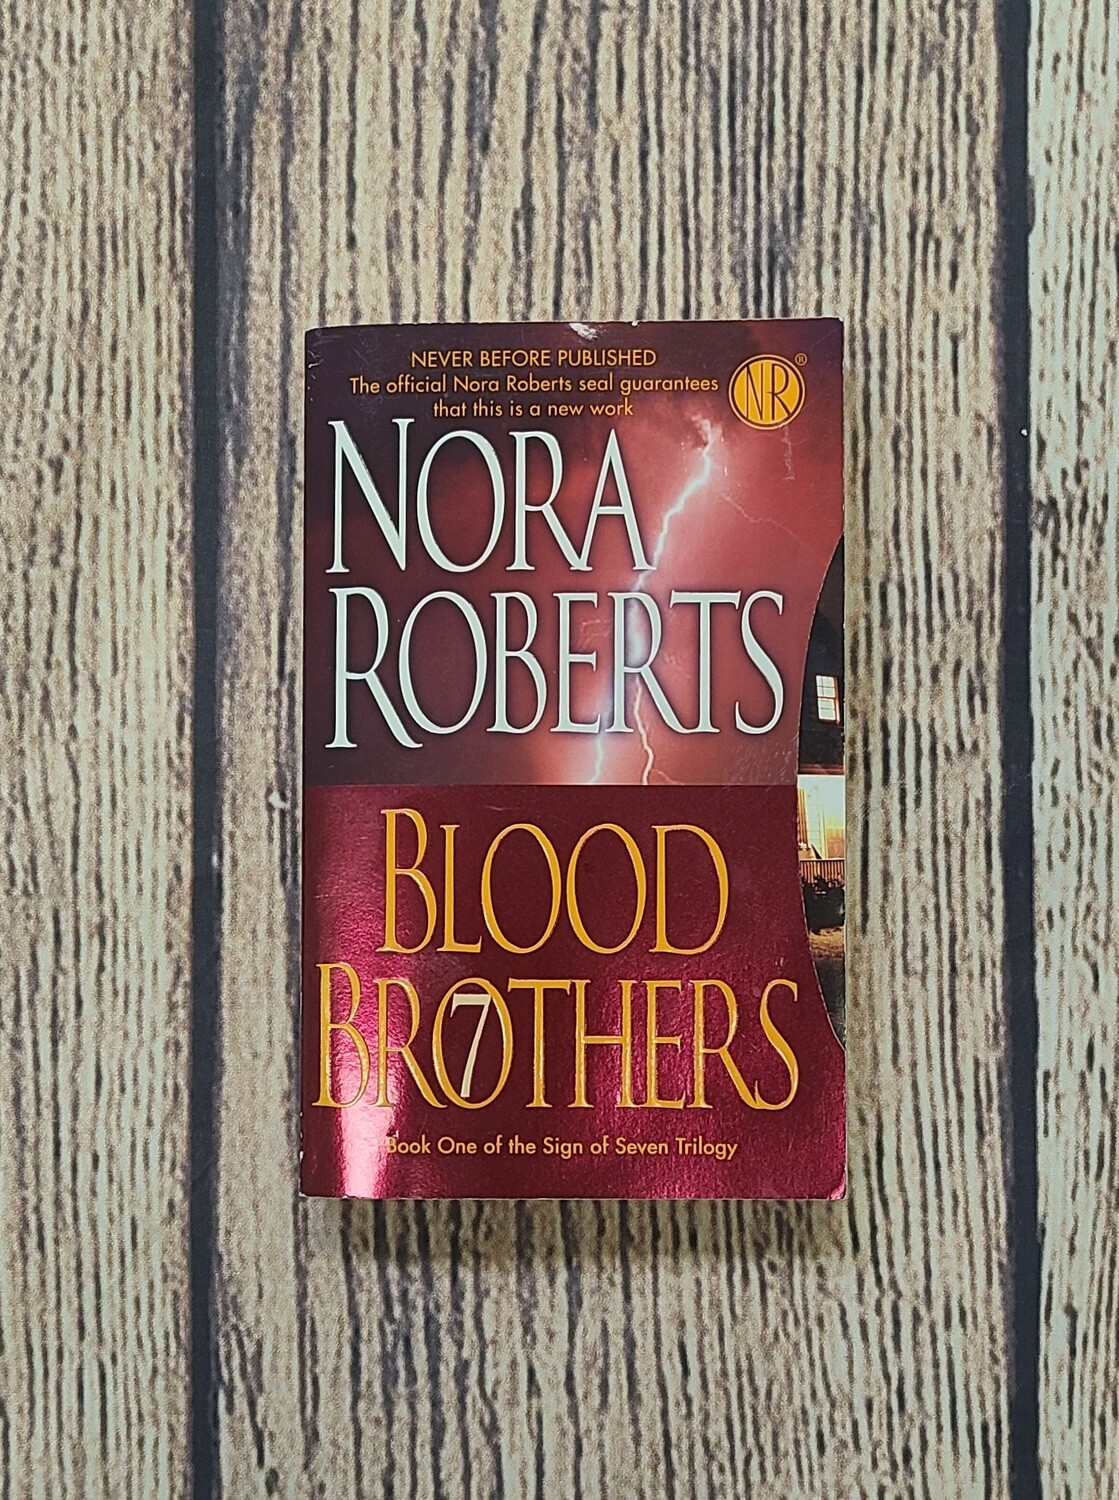 Blood Brothers by Nora Roberts